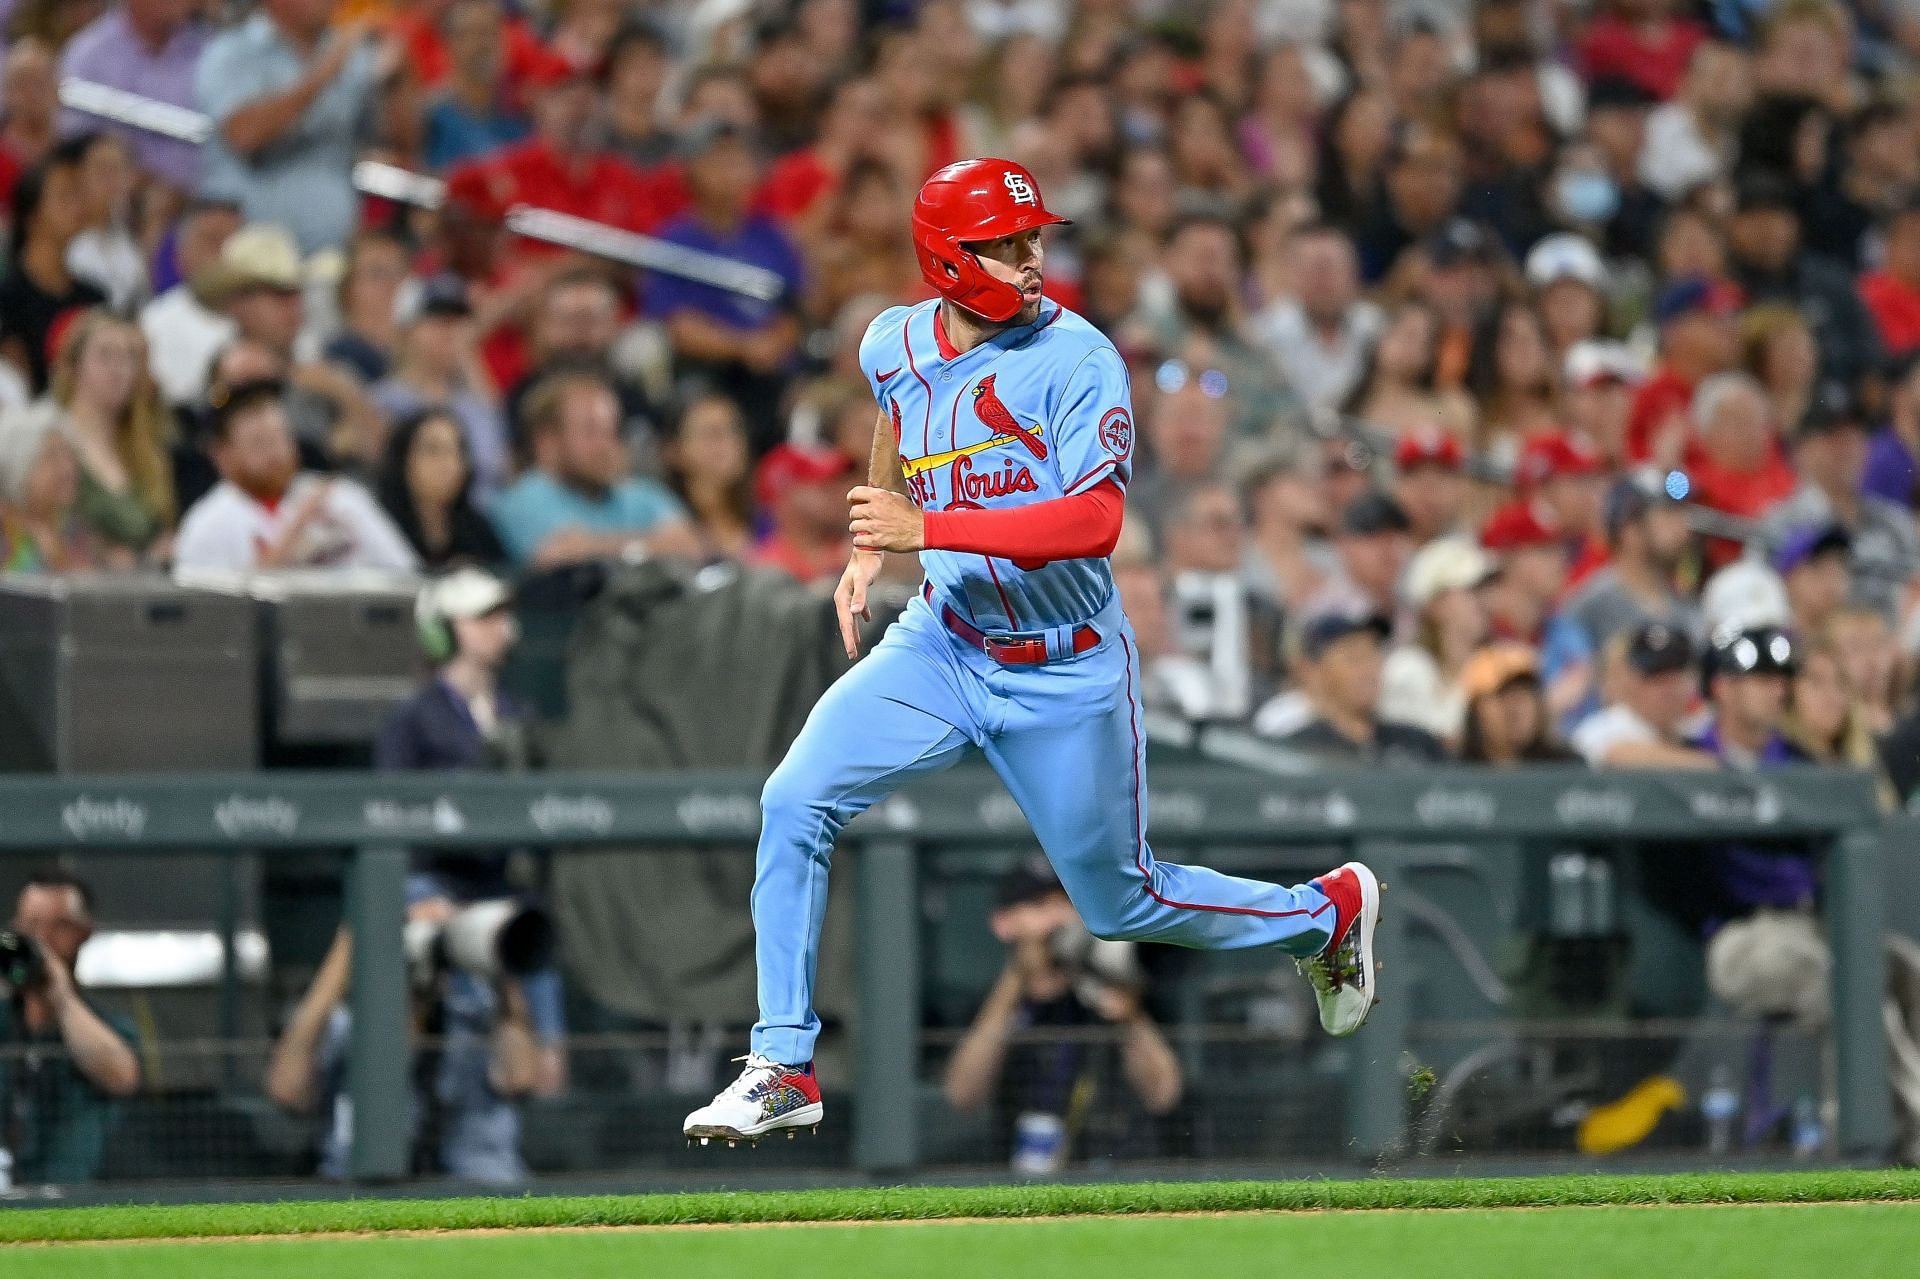 St. Louis Cardinals outfielder Dylan Carlson displayed his arm strength and bullet-like accuracy against the New York Mets on Wednesday.